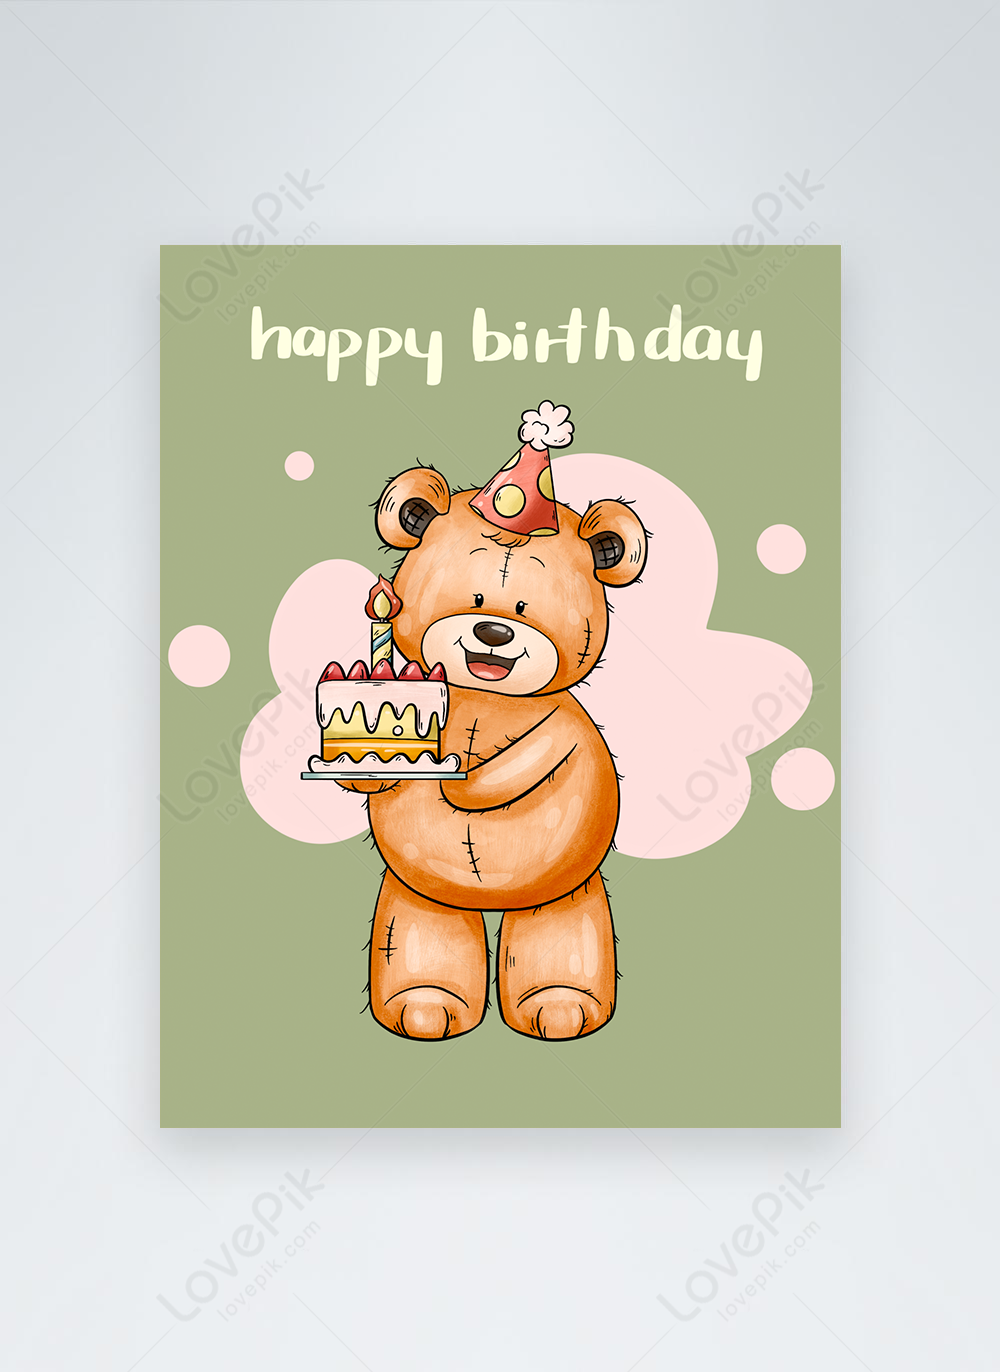 Cartoon style birthday bear greeting card template image_picture free ...